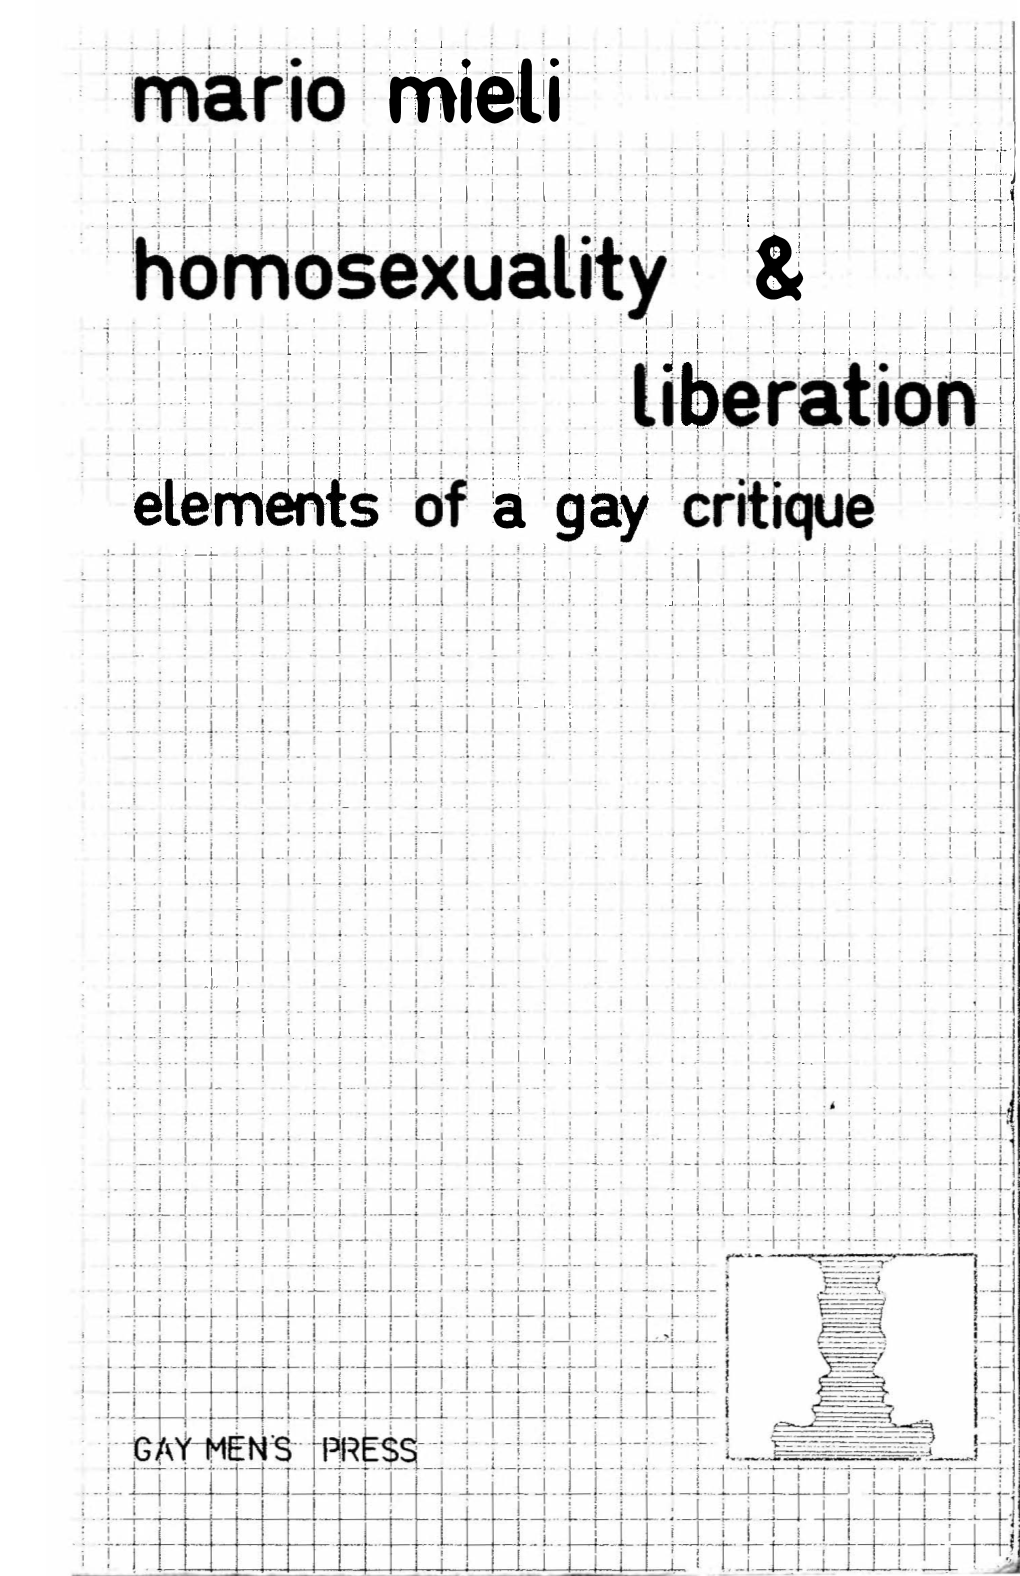 Mario Mieli, an Italian, Came to London in 1971 As a Student and Joined the Gay Liberation Front